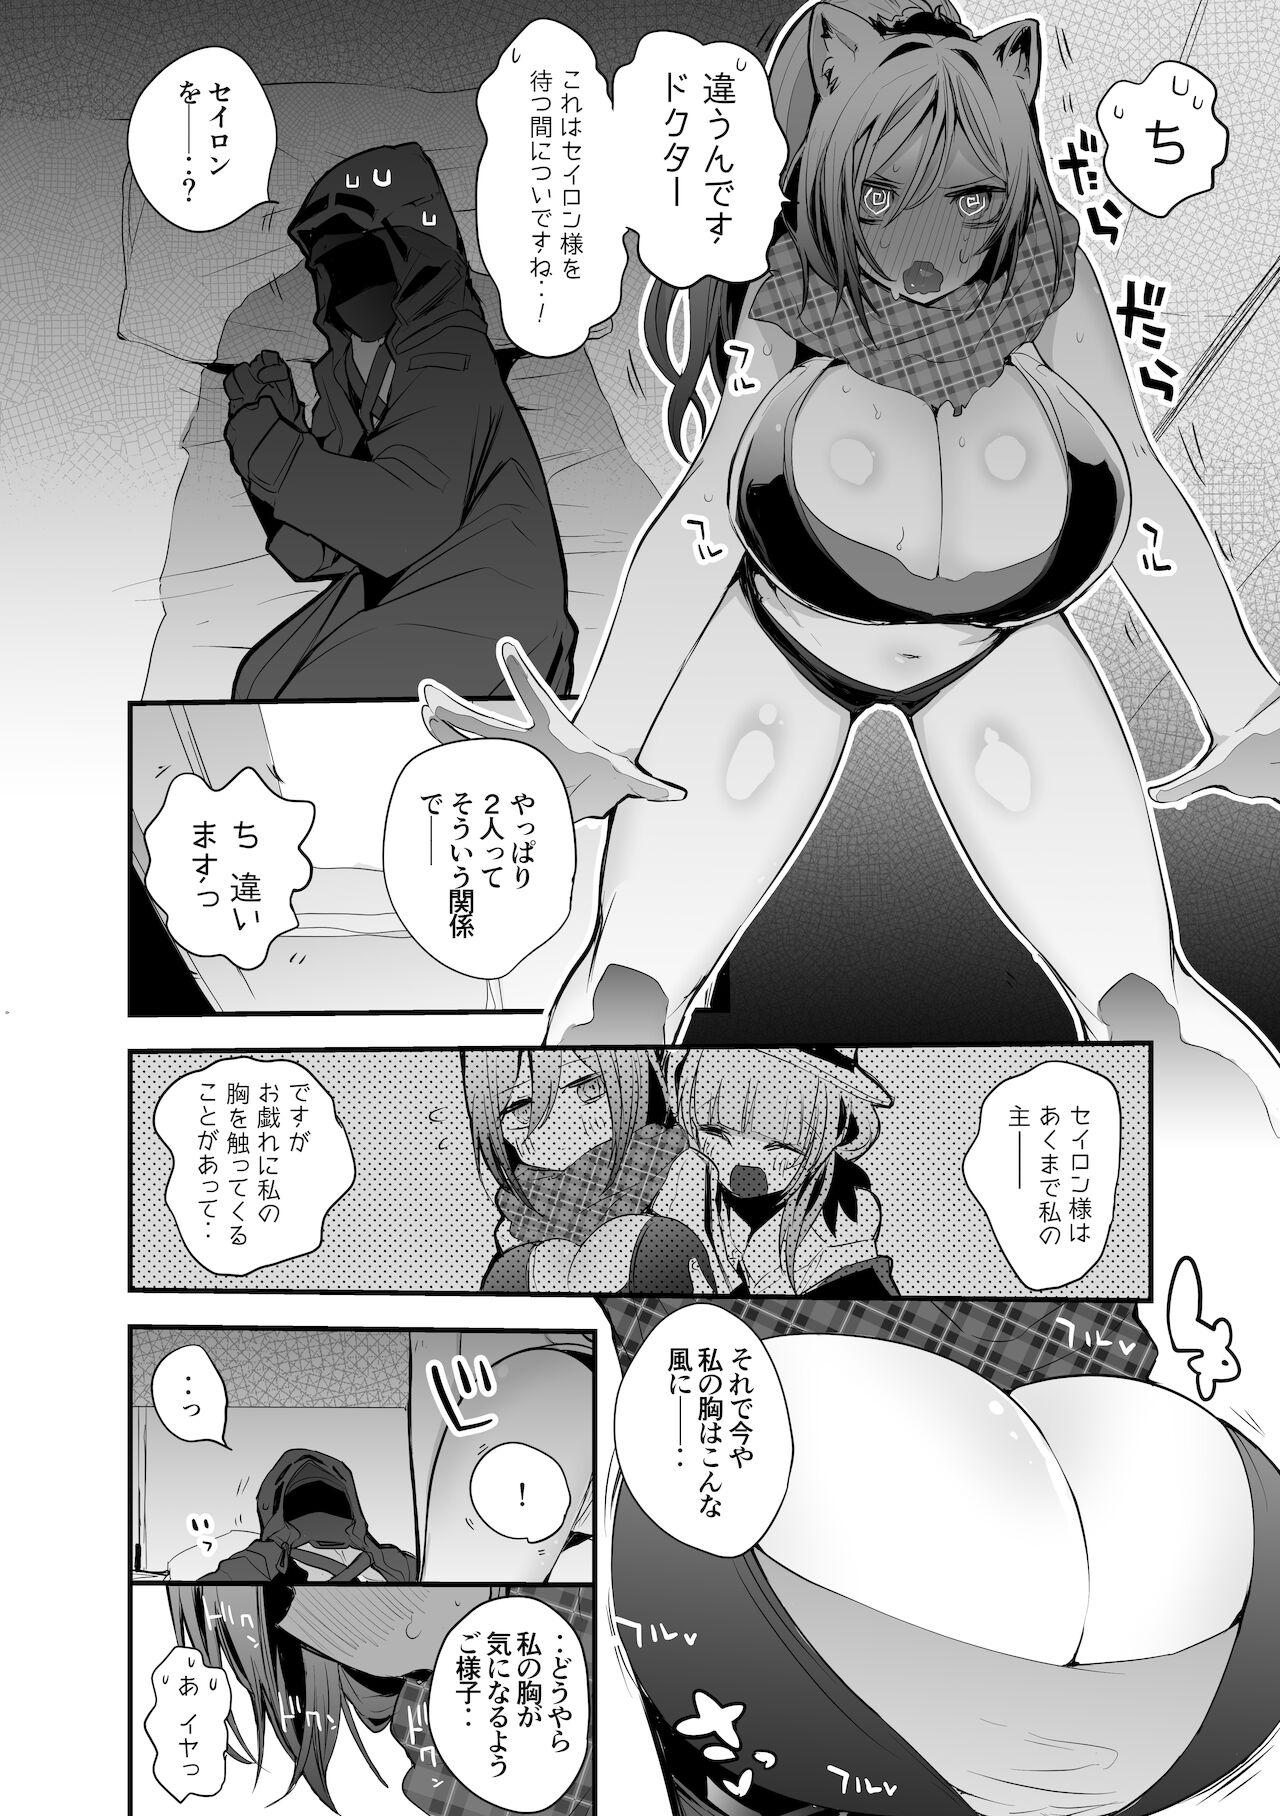 Thong シュヴァルツは押し倒す編 - Arknights Parties - Page 3